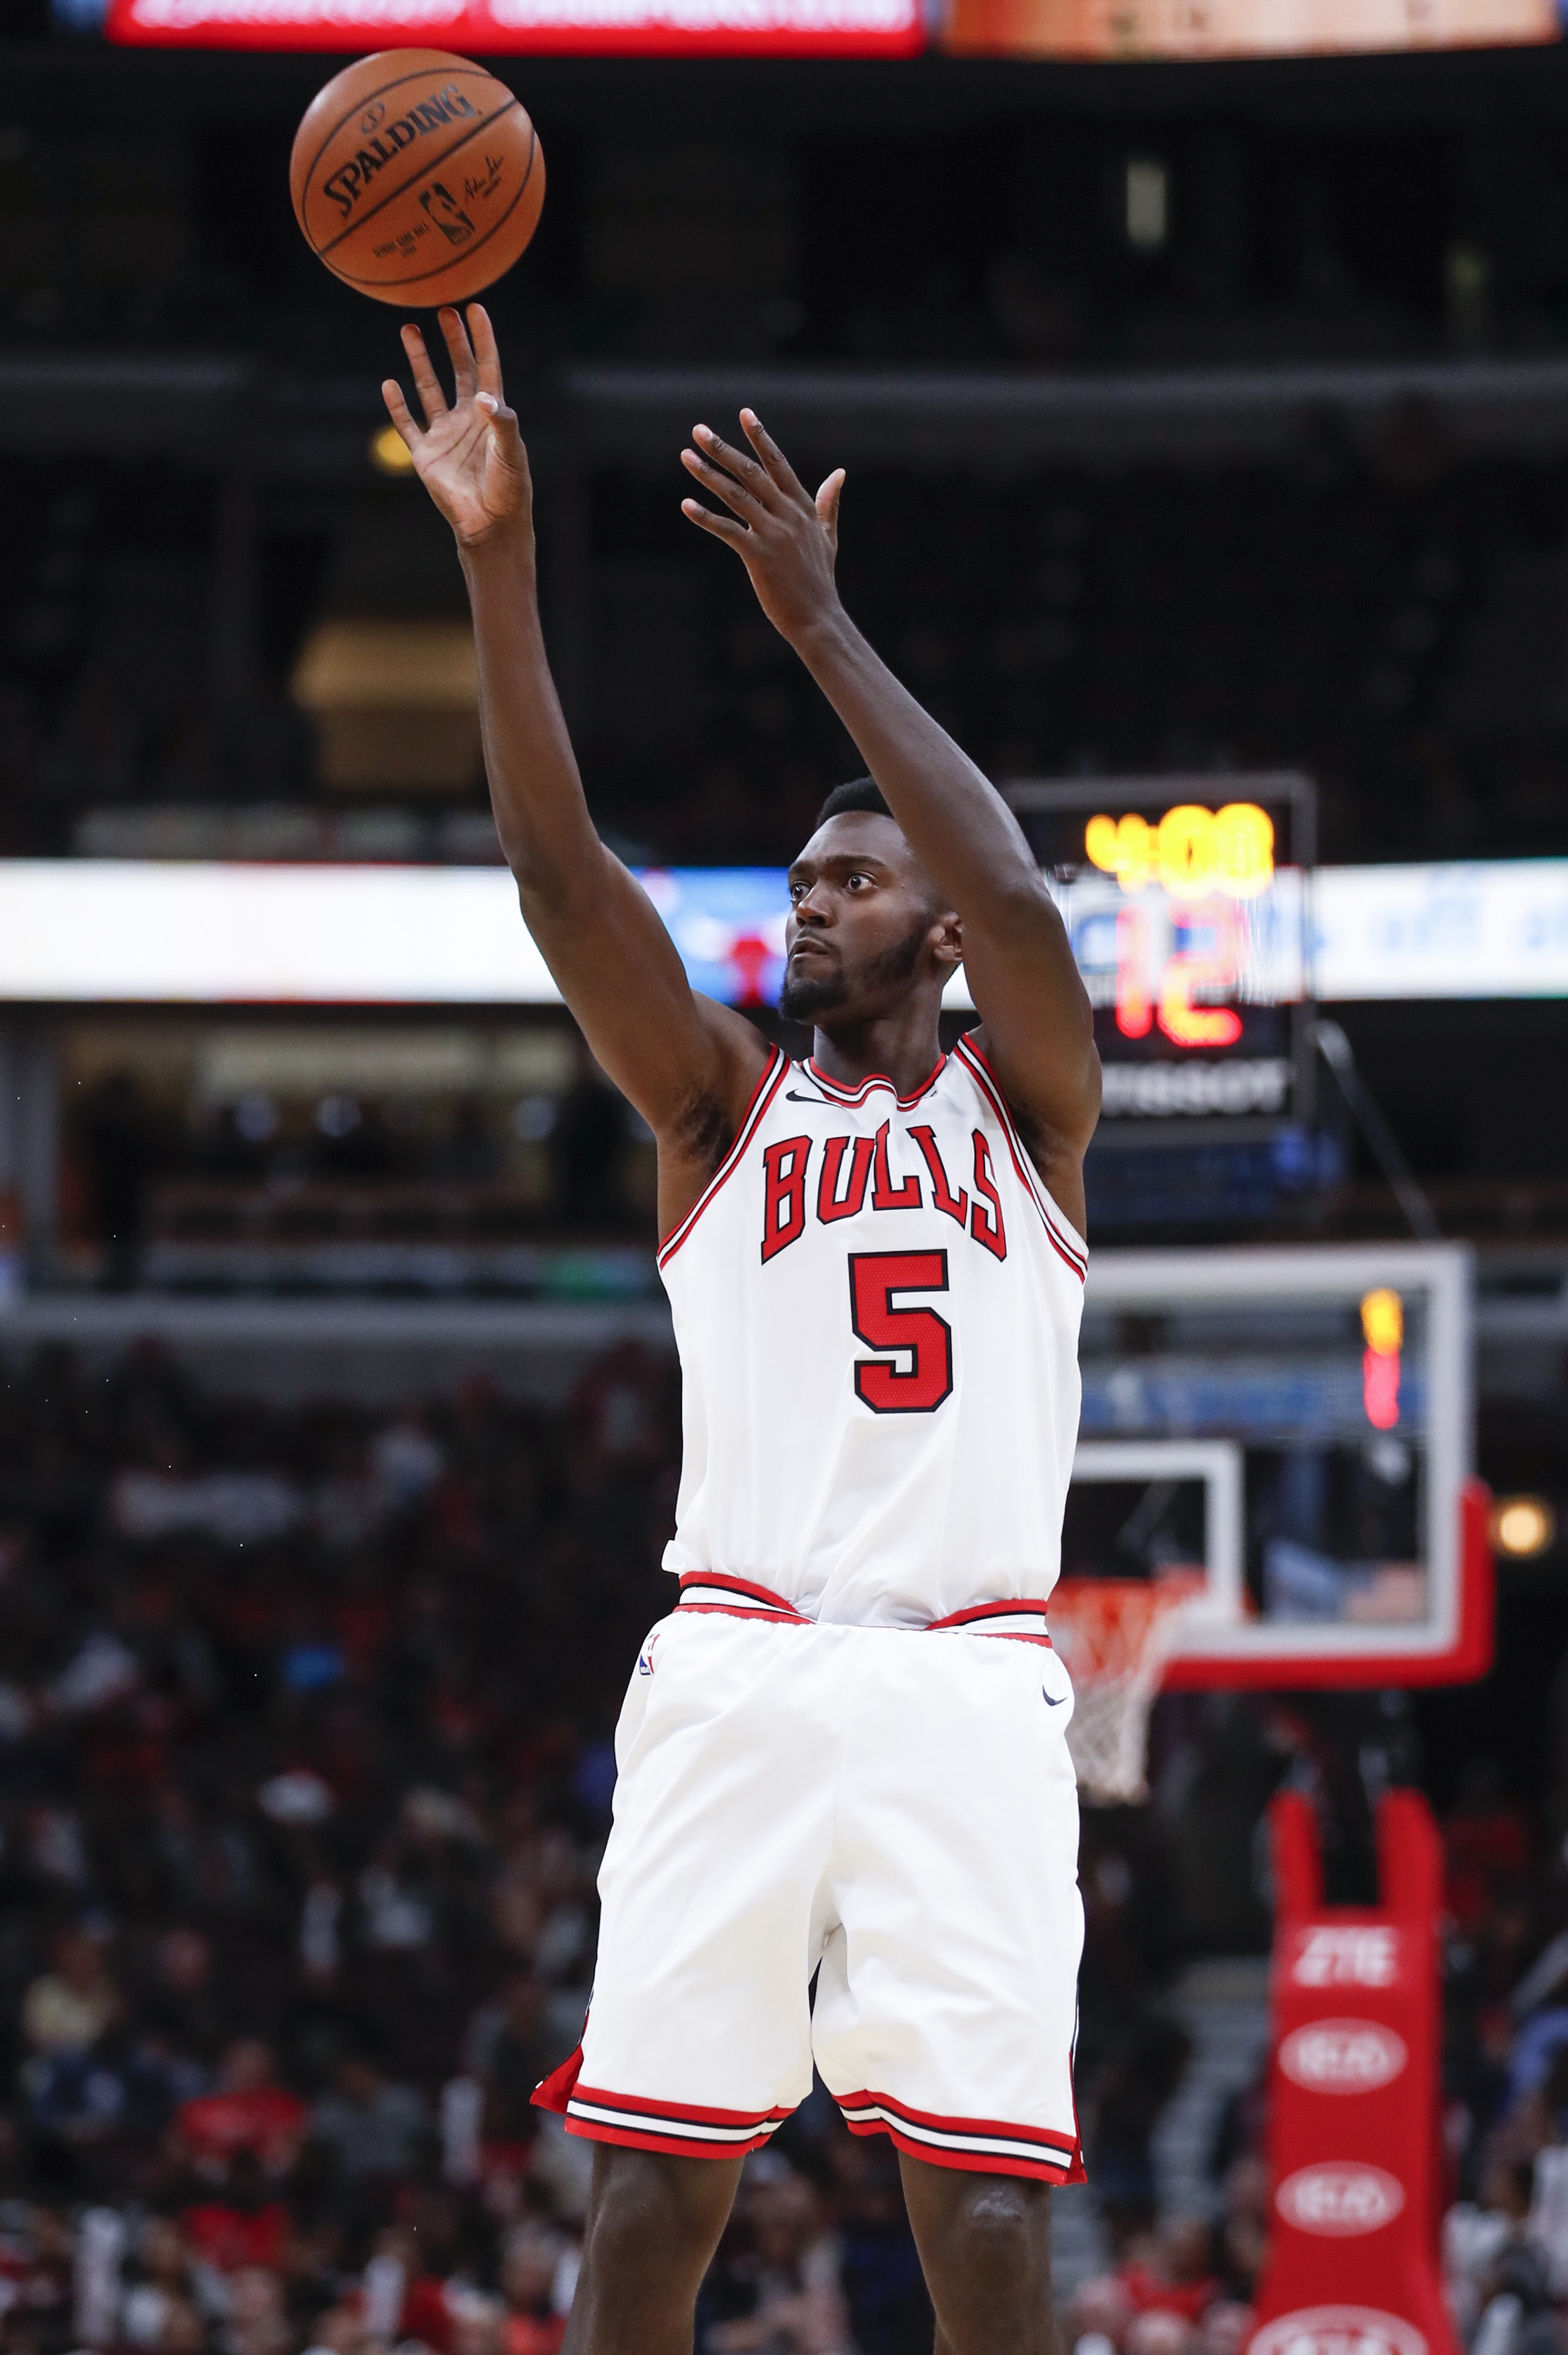 That wasn't inadvertent': Bulls' Bobby Portis believes Warriors